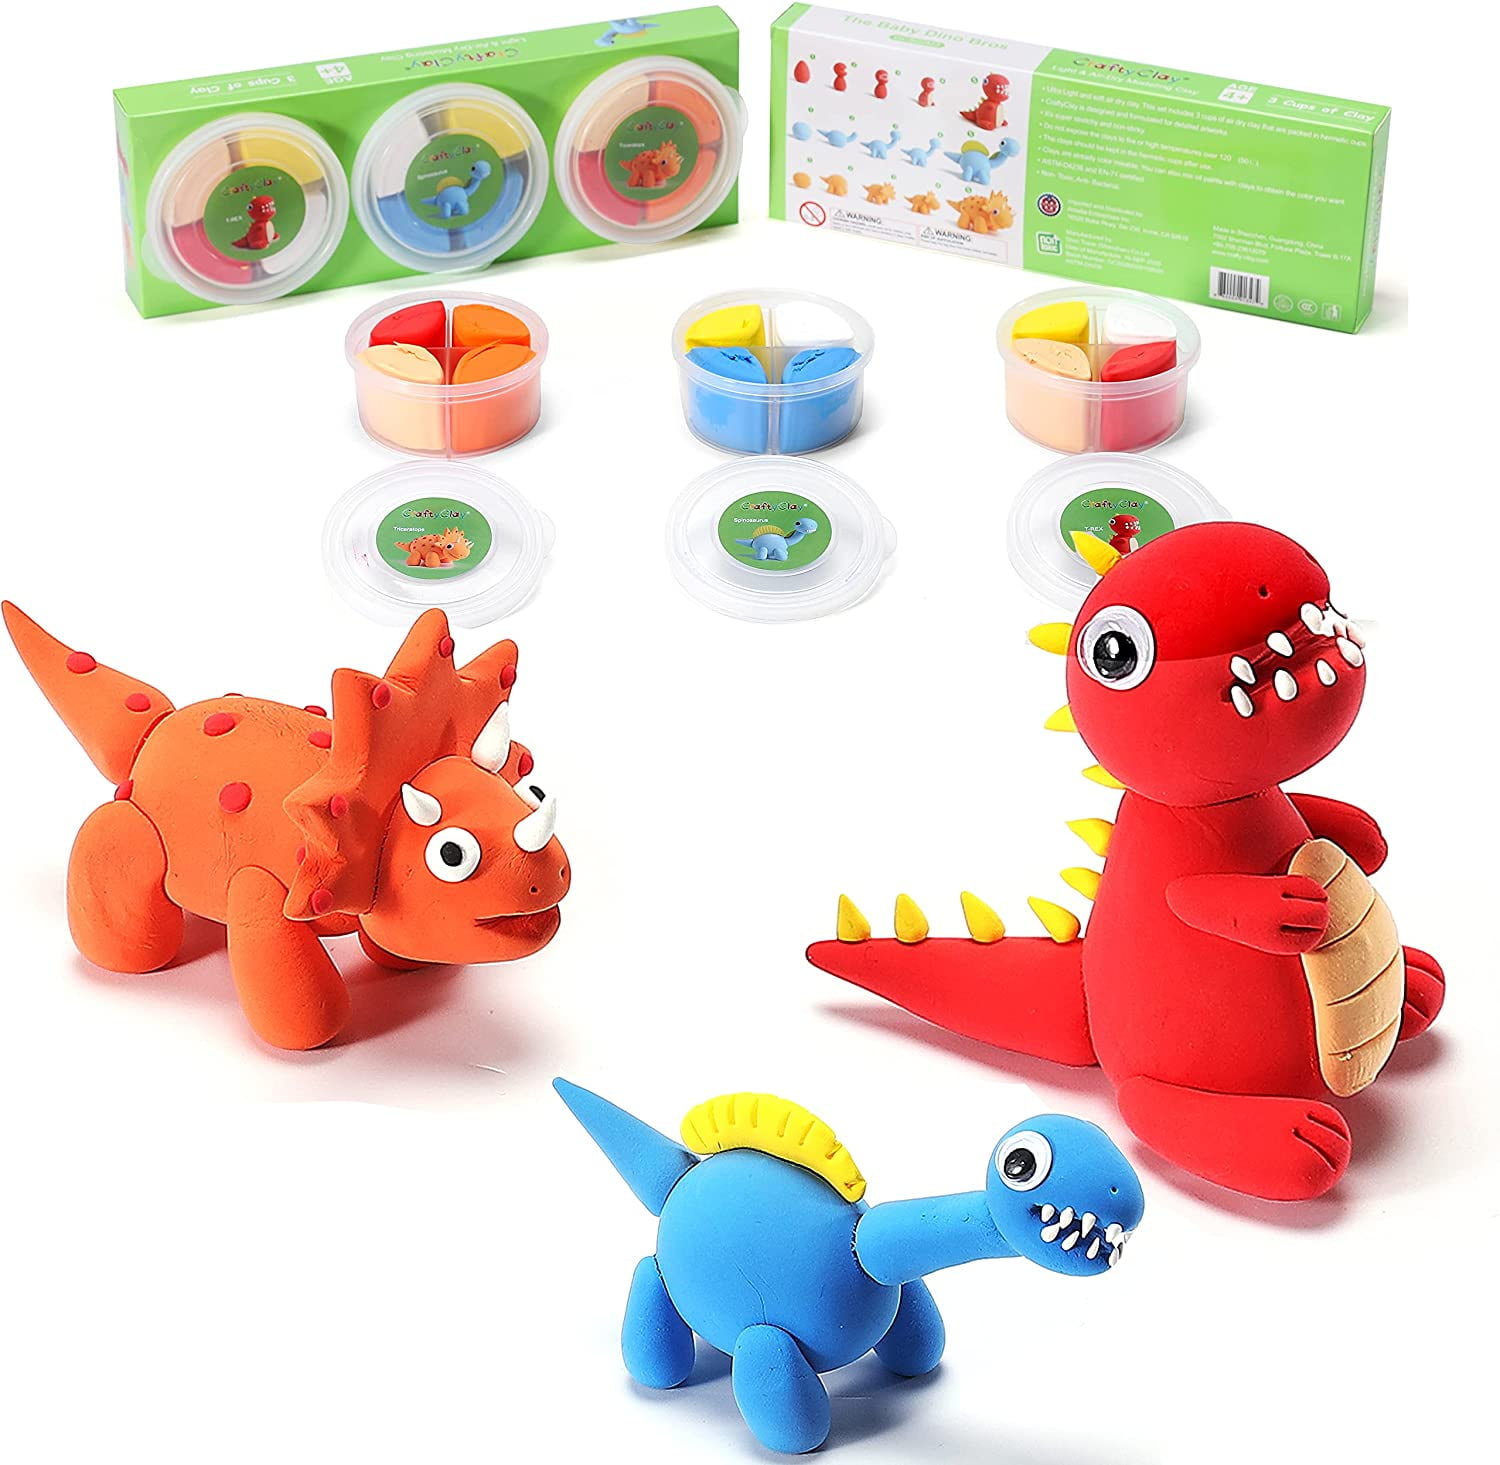 Dinosaur Theme Air Dry Modeling Clay Kit for Kids (3 Cups Set